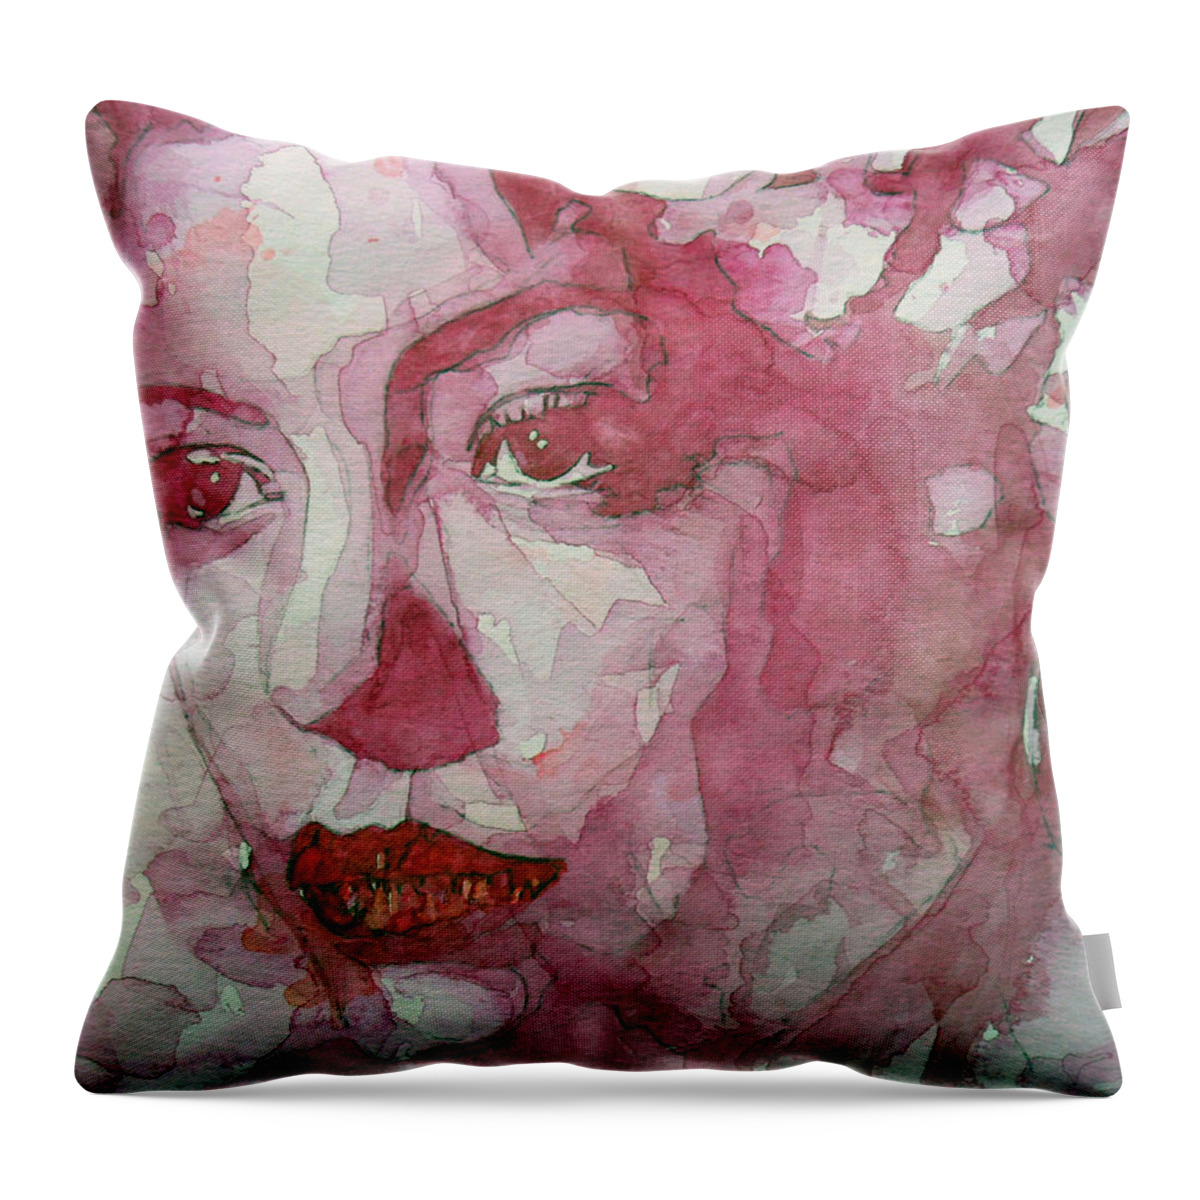 Billie Holiday Throw Pillow featuring the painting All Of Me by Paul Lovering